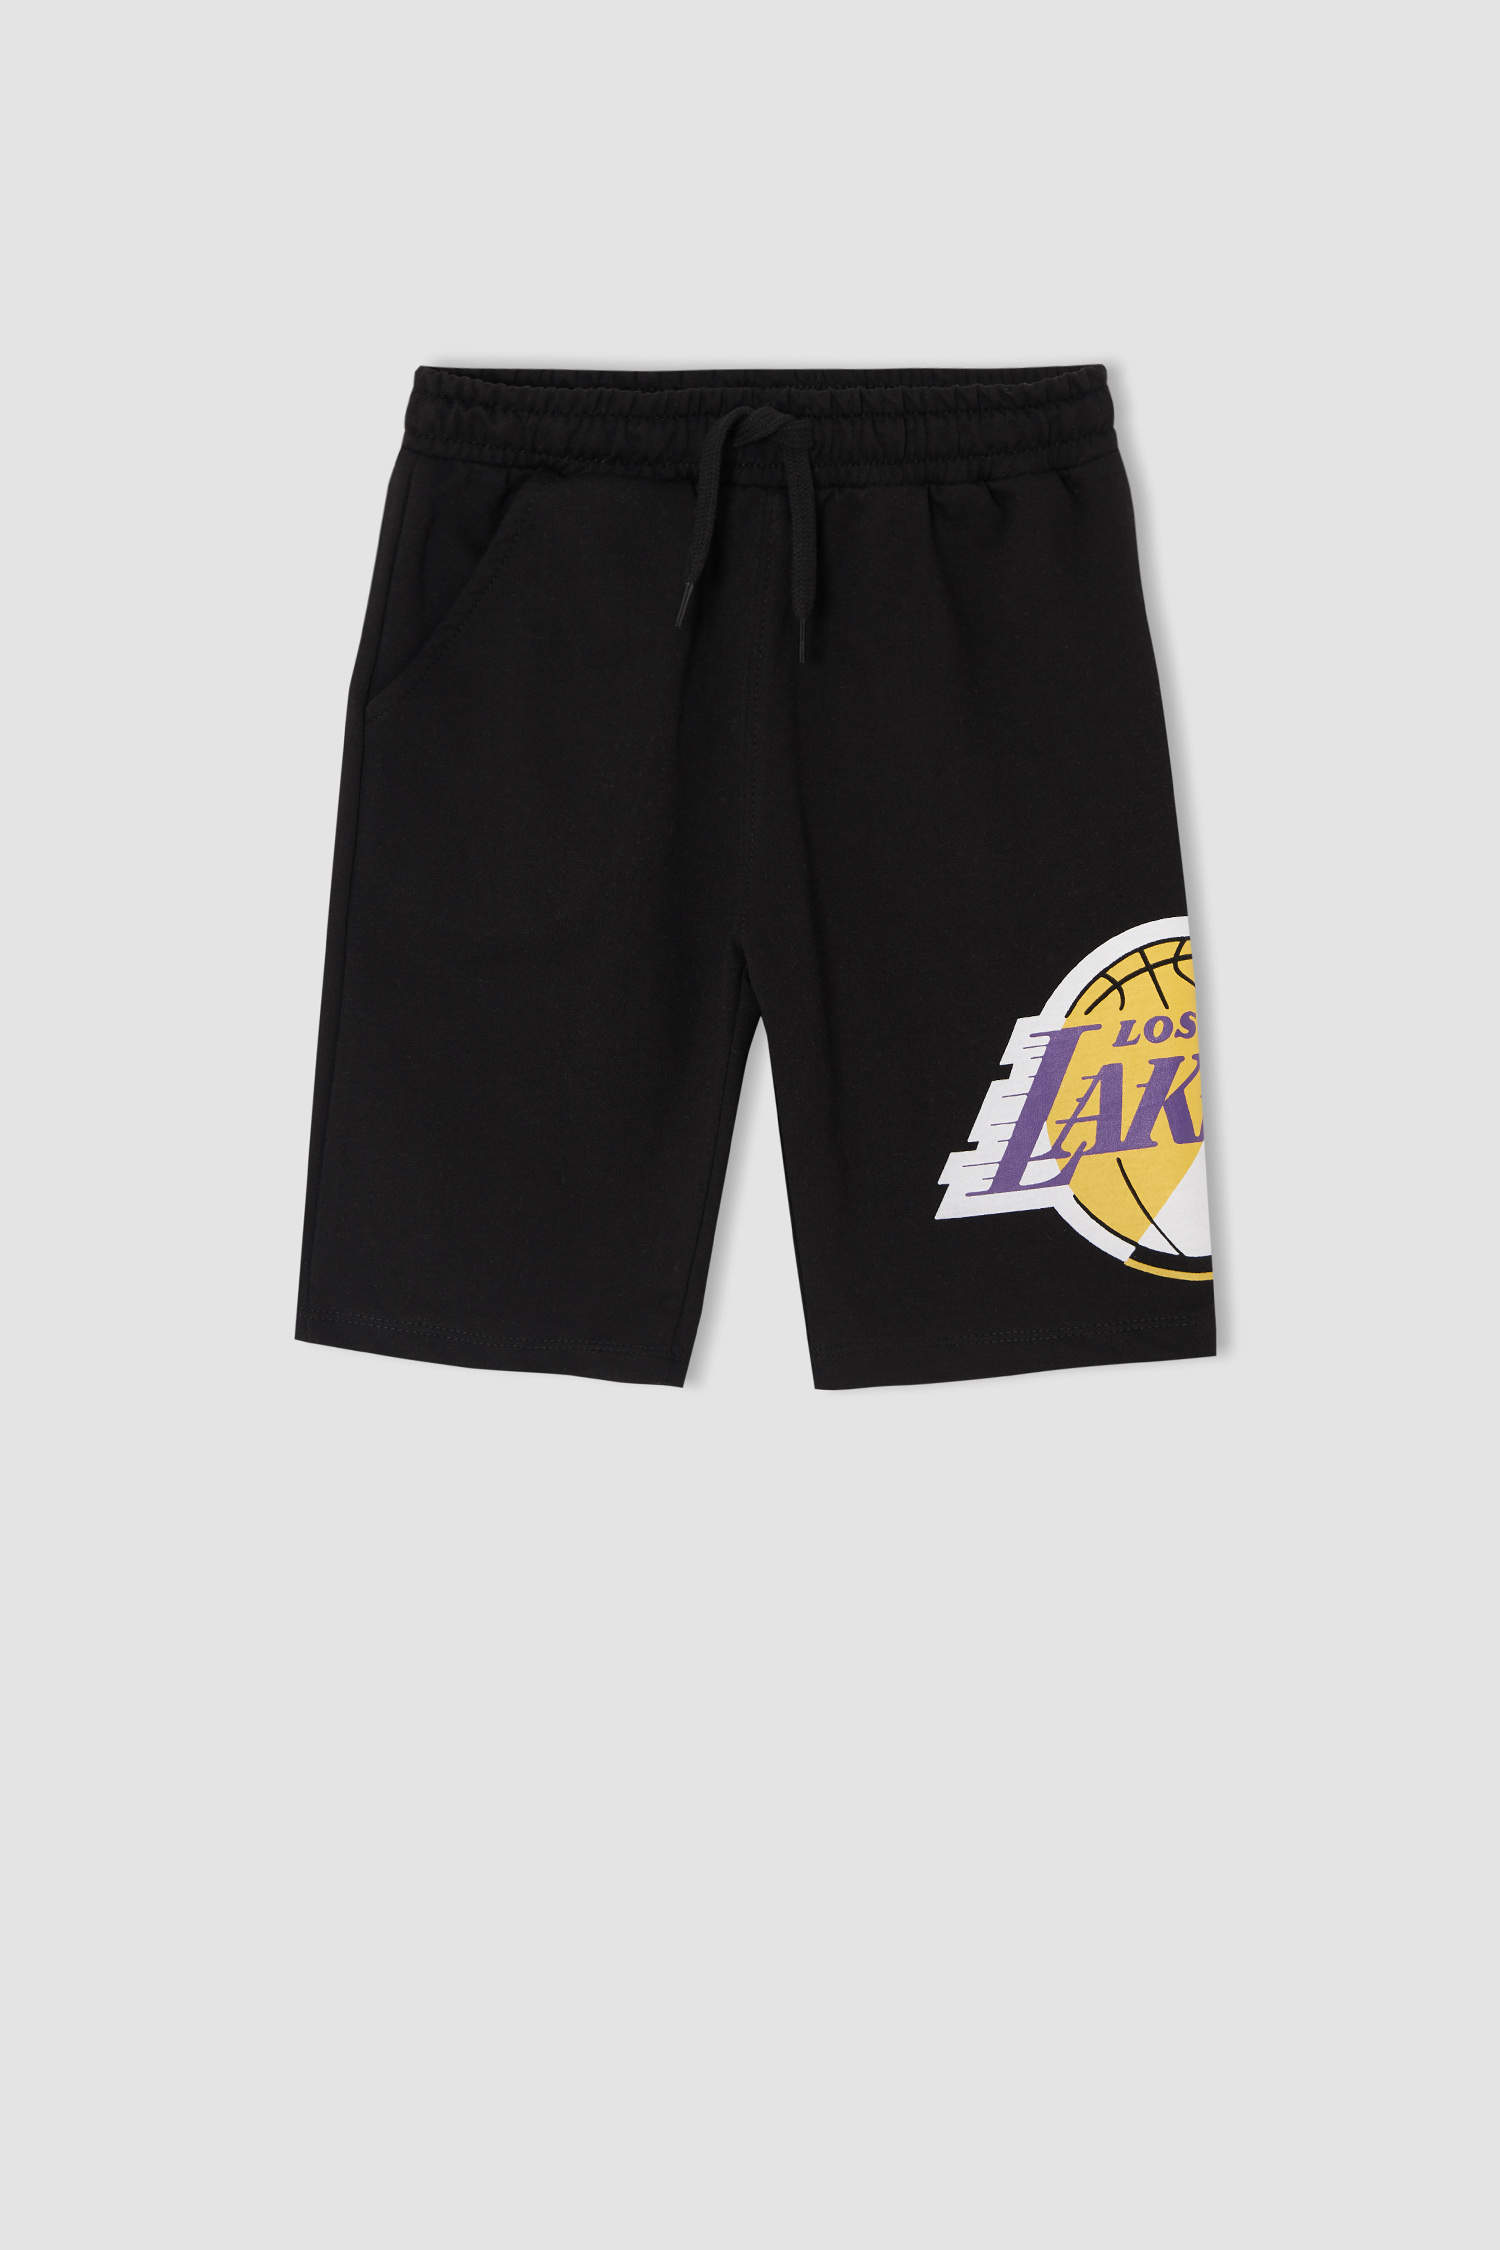 lakers shorts price